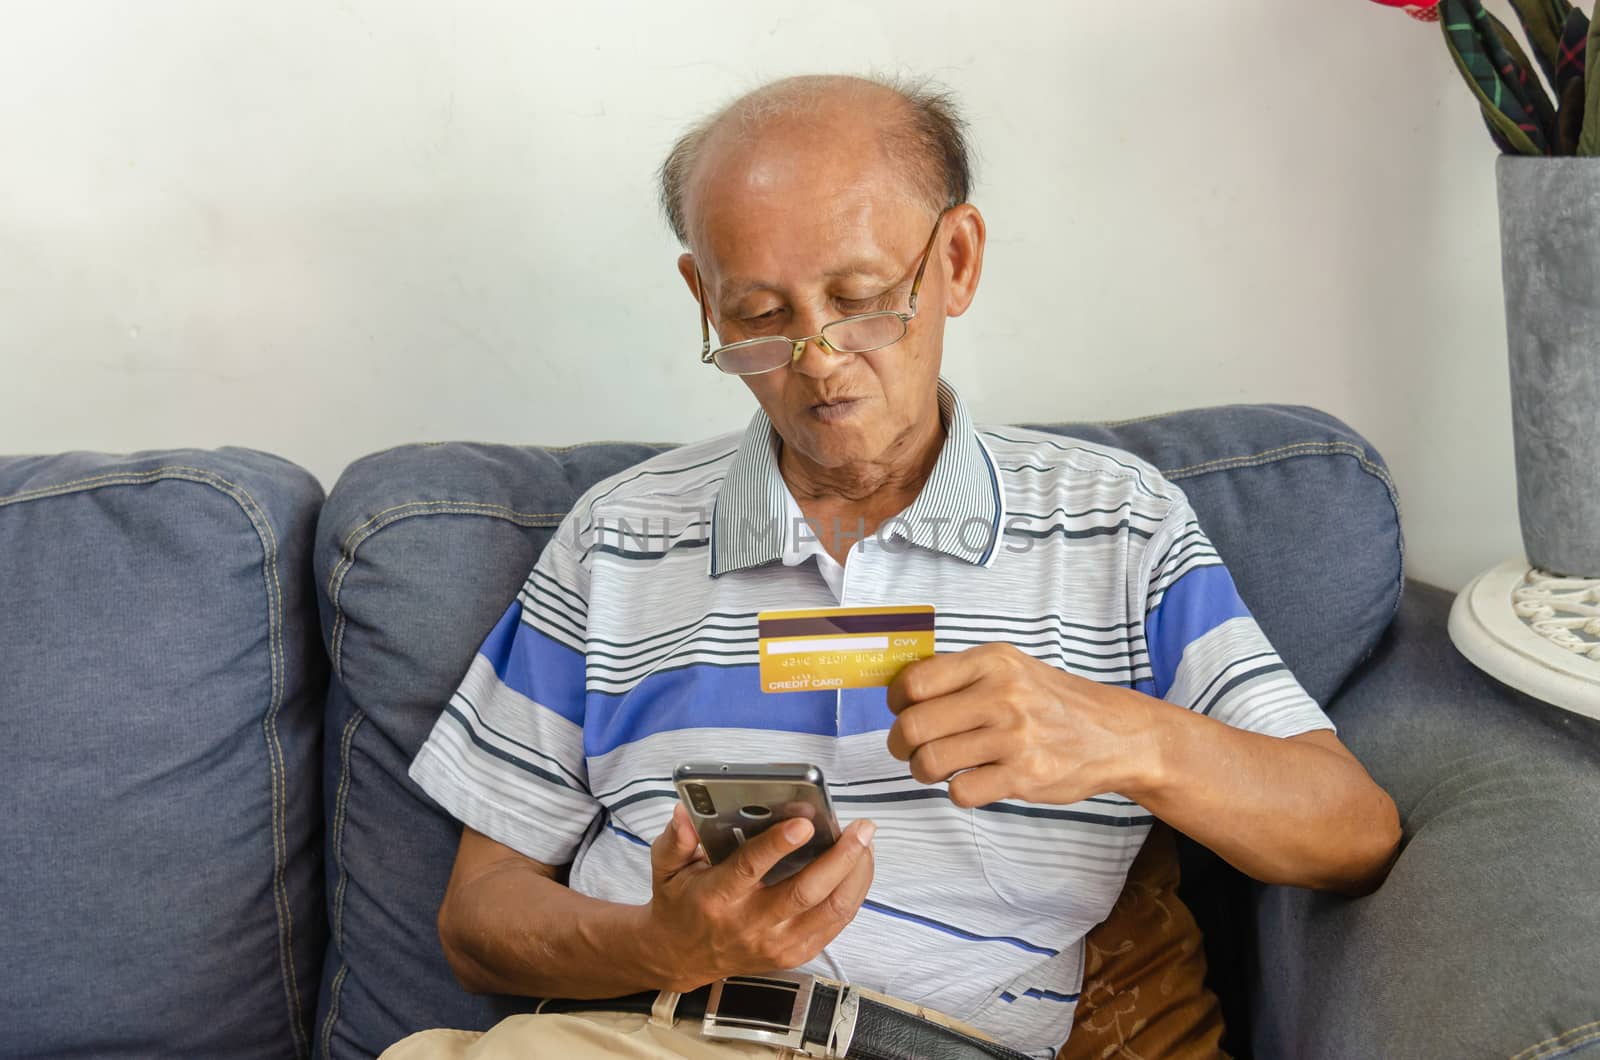 Seniors look at credit cards and mobile phones. by aoo3771